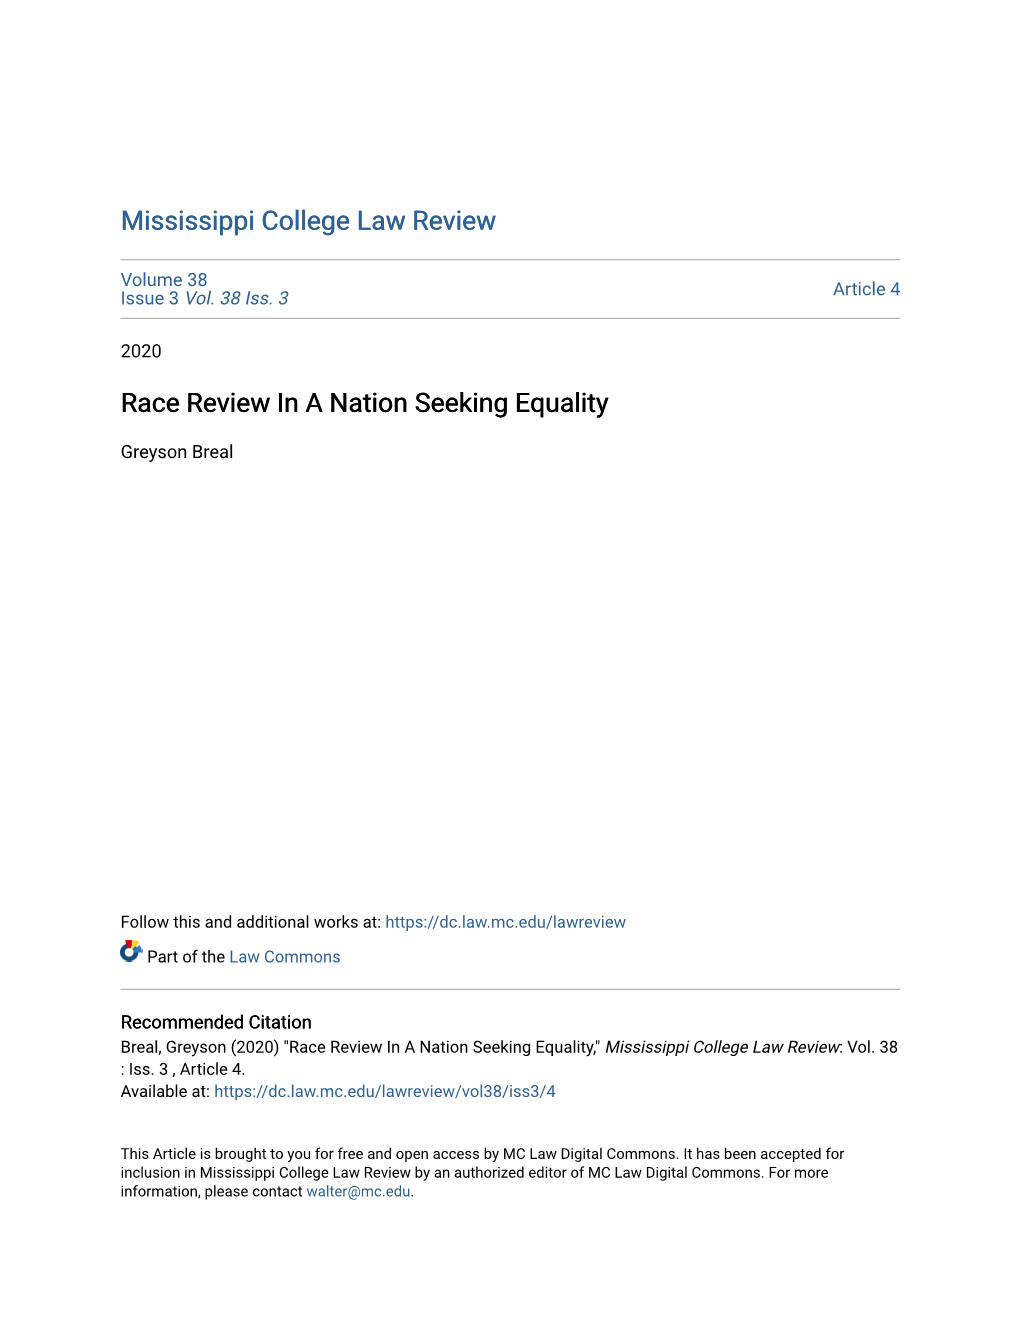 Race Review in a Nation Seeking Equality